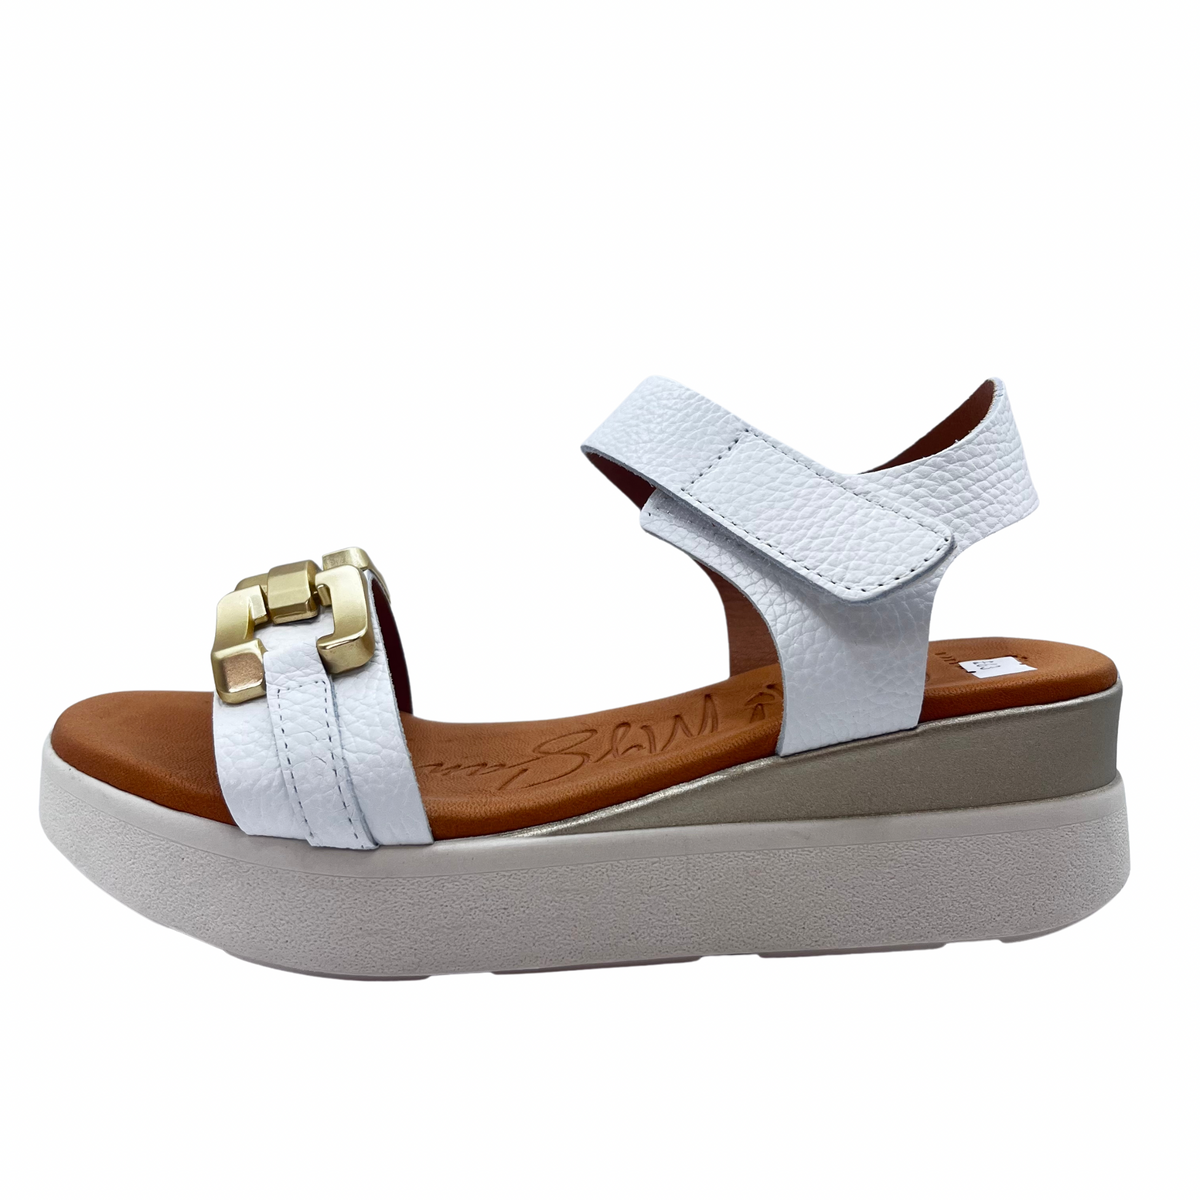 Oh My Sandals White Wedge Leather Sandal